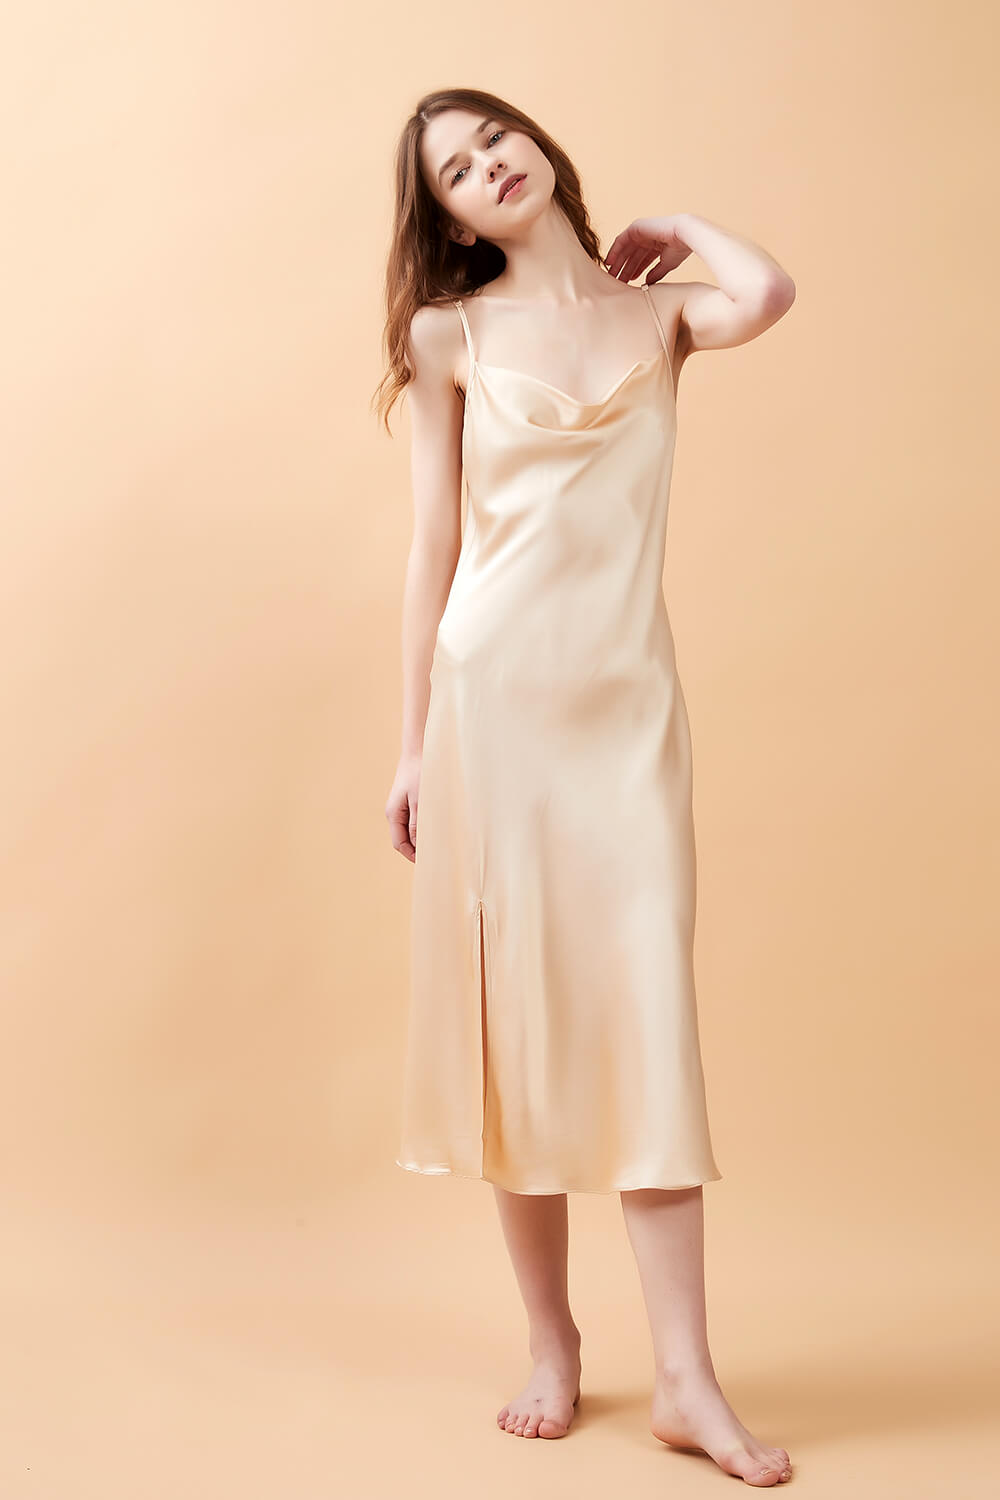 Champagne Gold Silk Cowl Neck Night Dress with Side Slit - BASK™